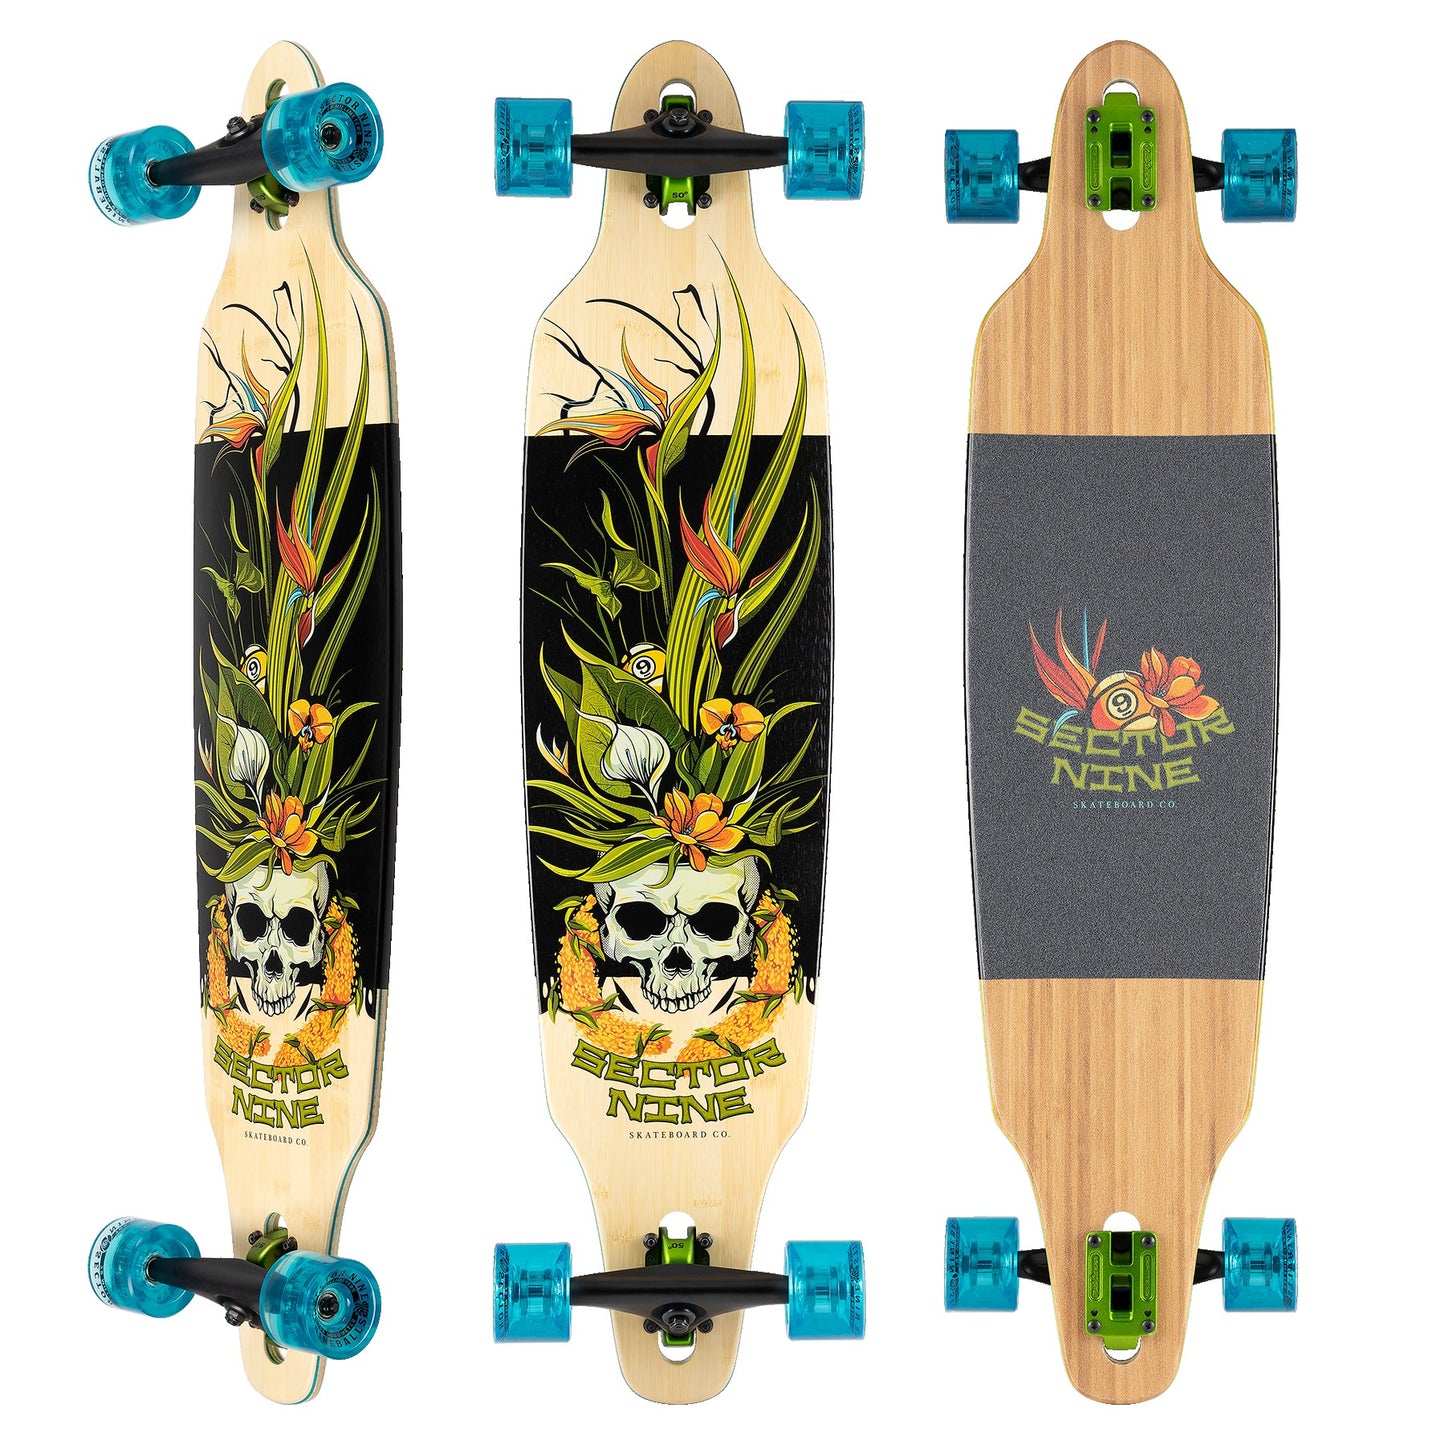 [SP21-SP-COMP-0003] SECTOR 9 LEI LOOKOUT 9.625 COMPLETE SECTOR 9